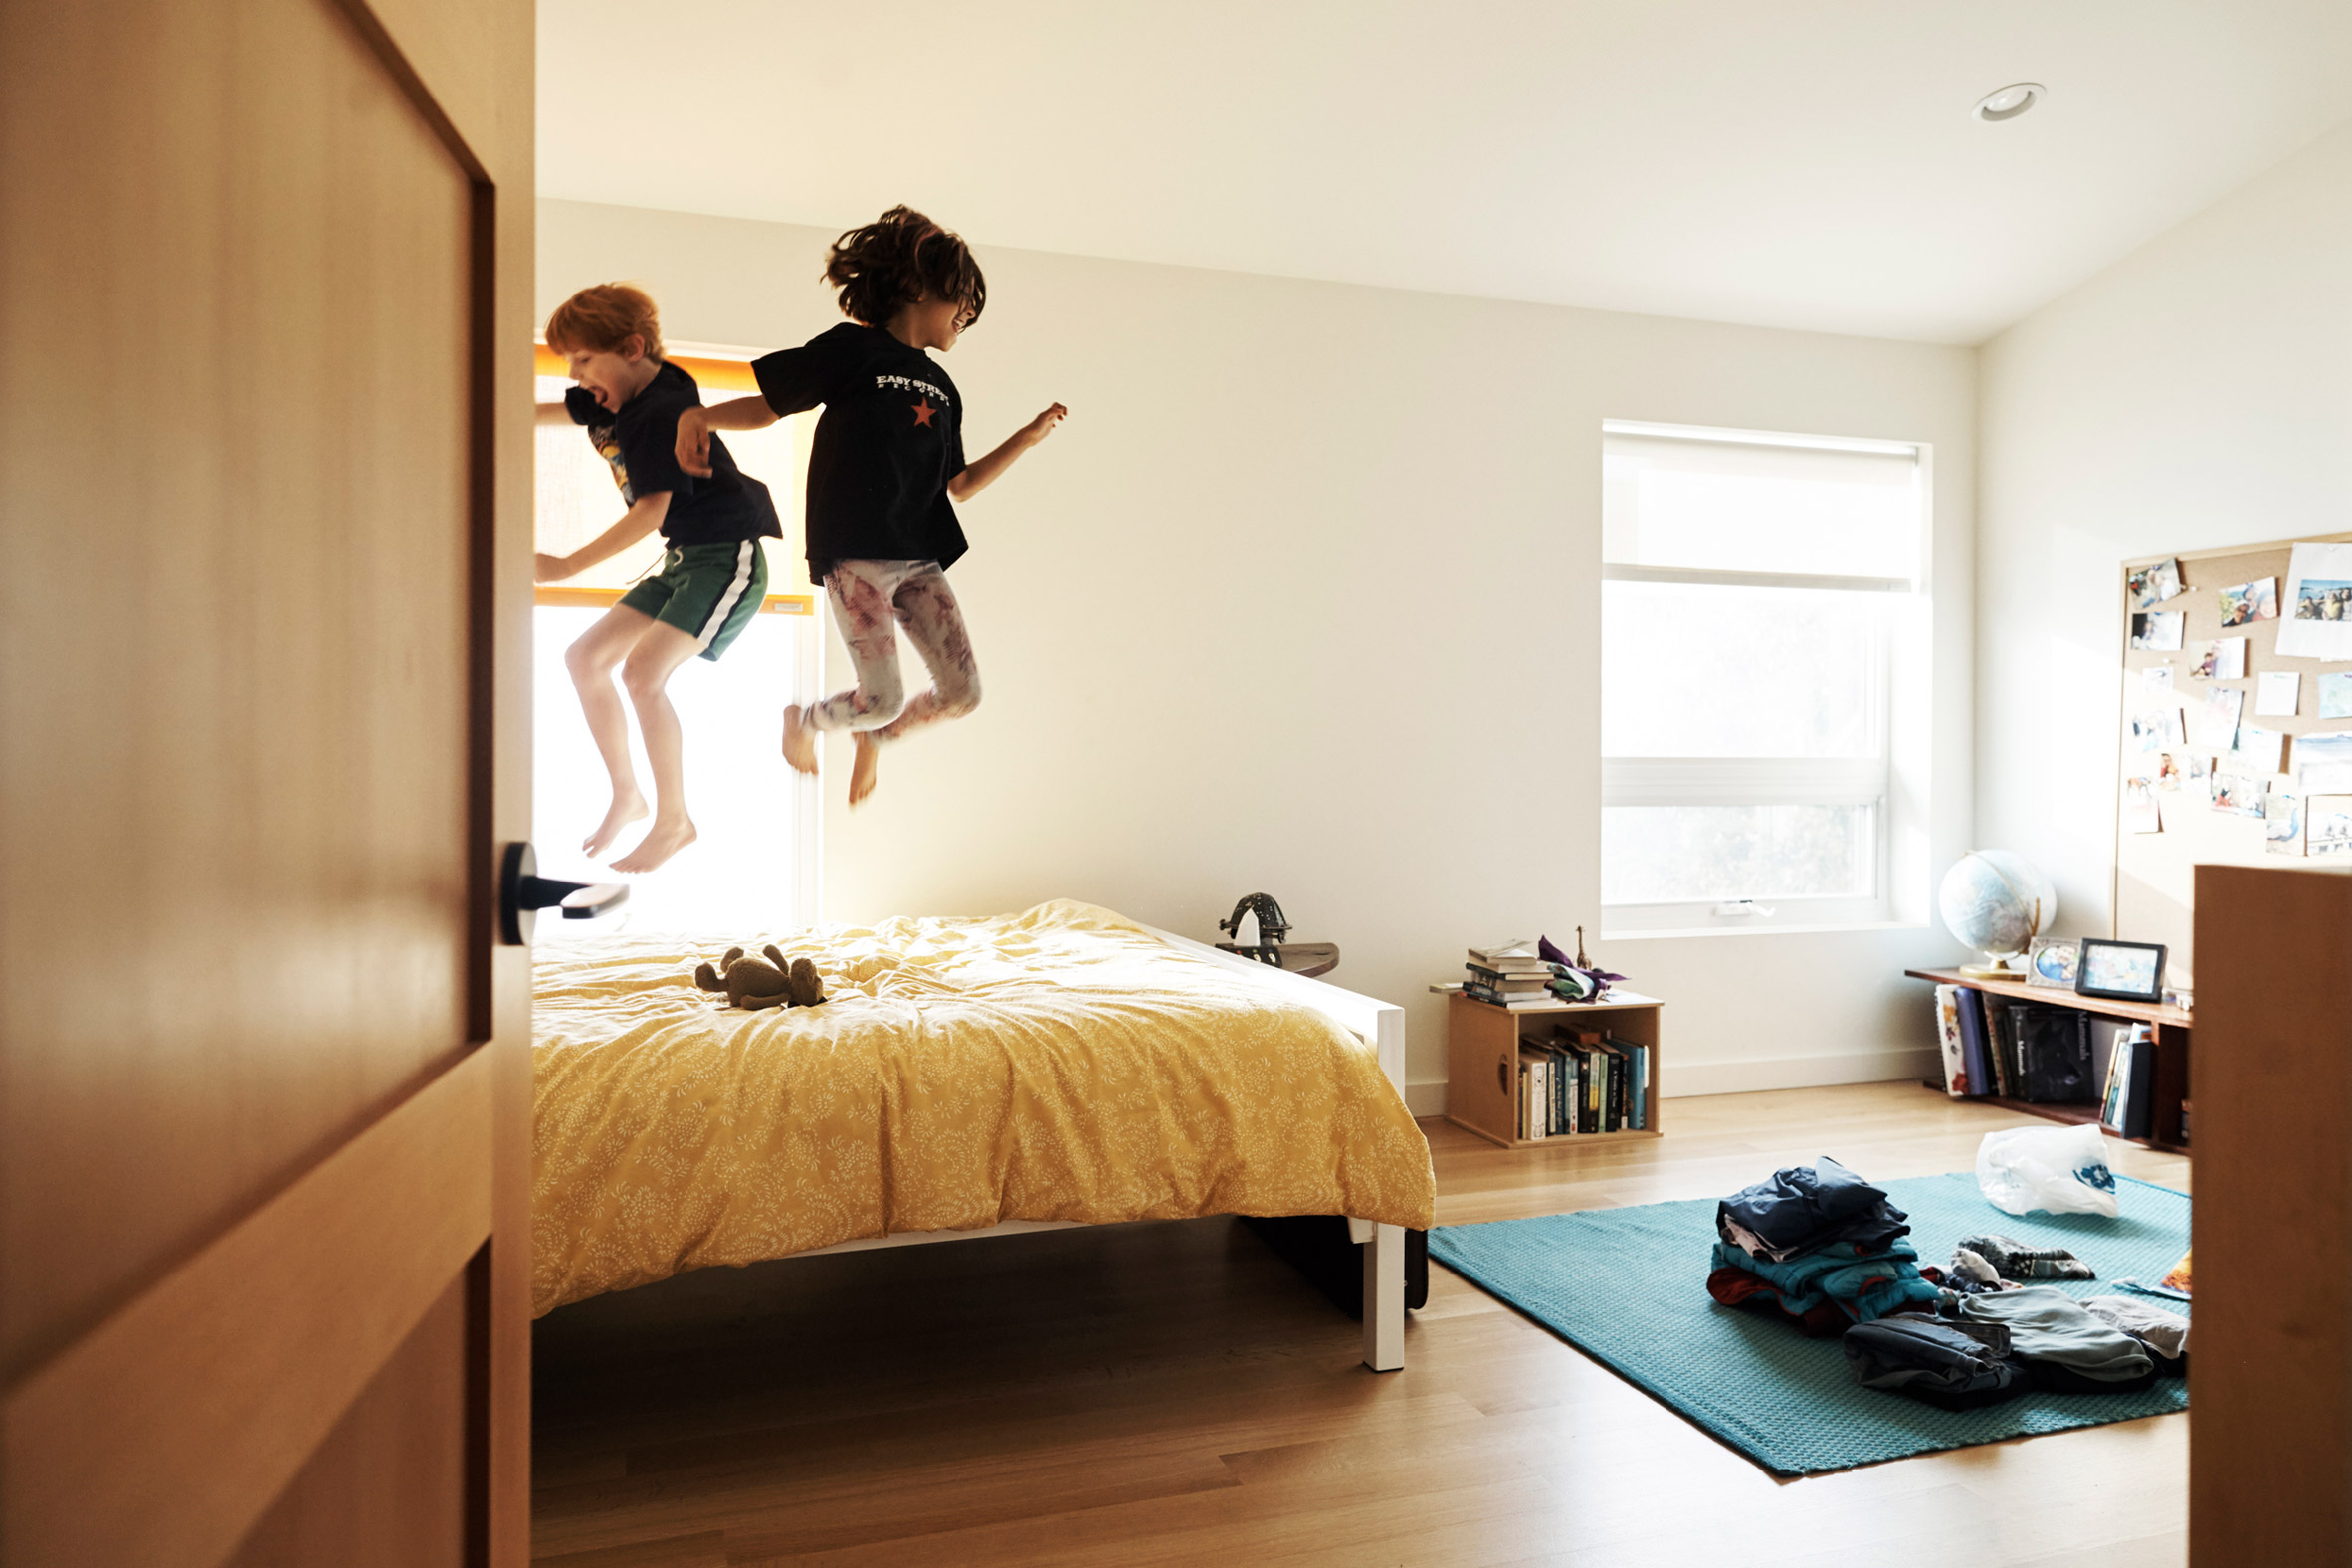 The couple's children enjoy jumping on their bed in Central Area Home